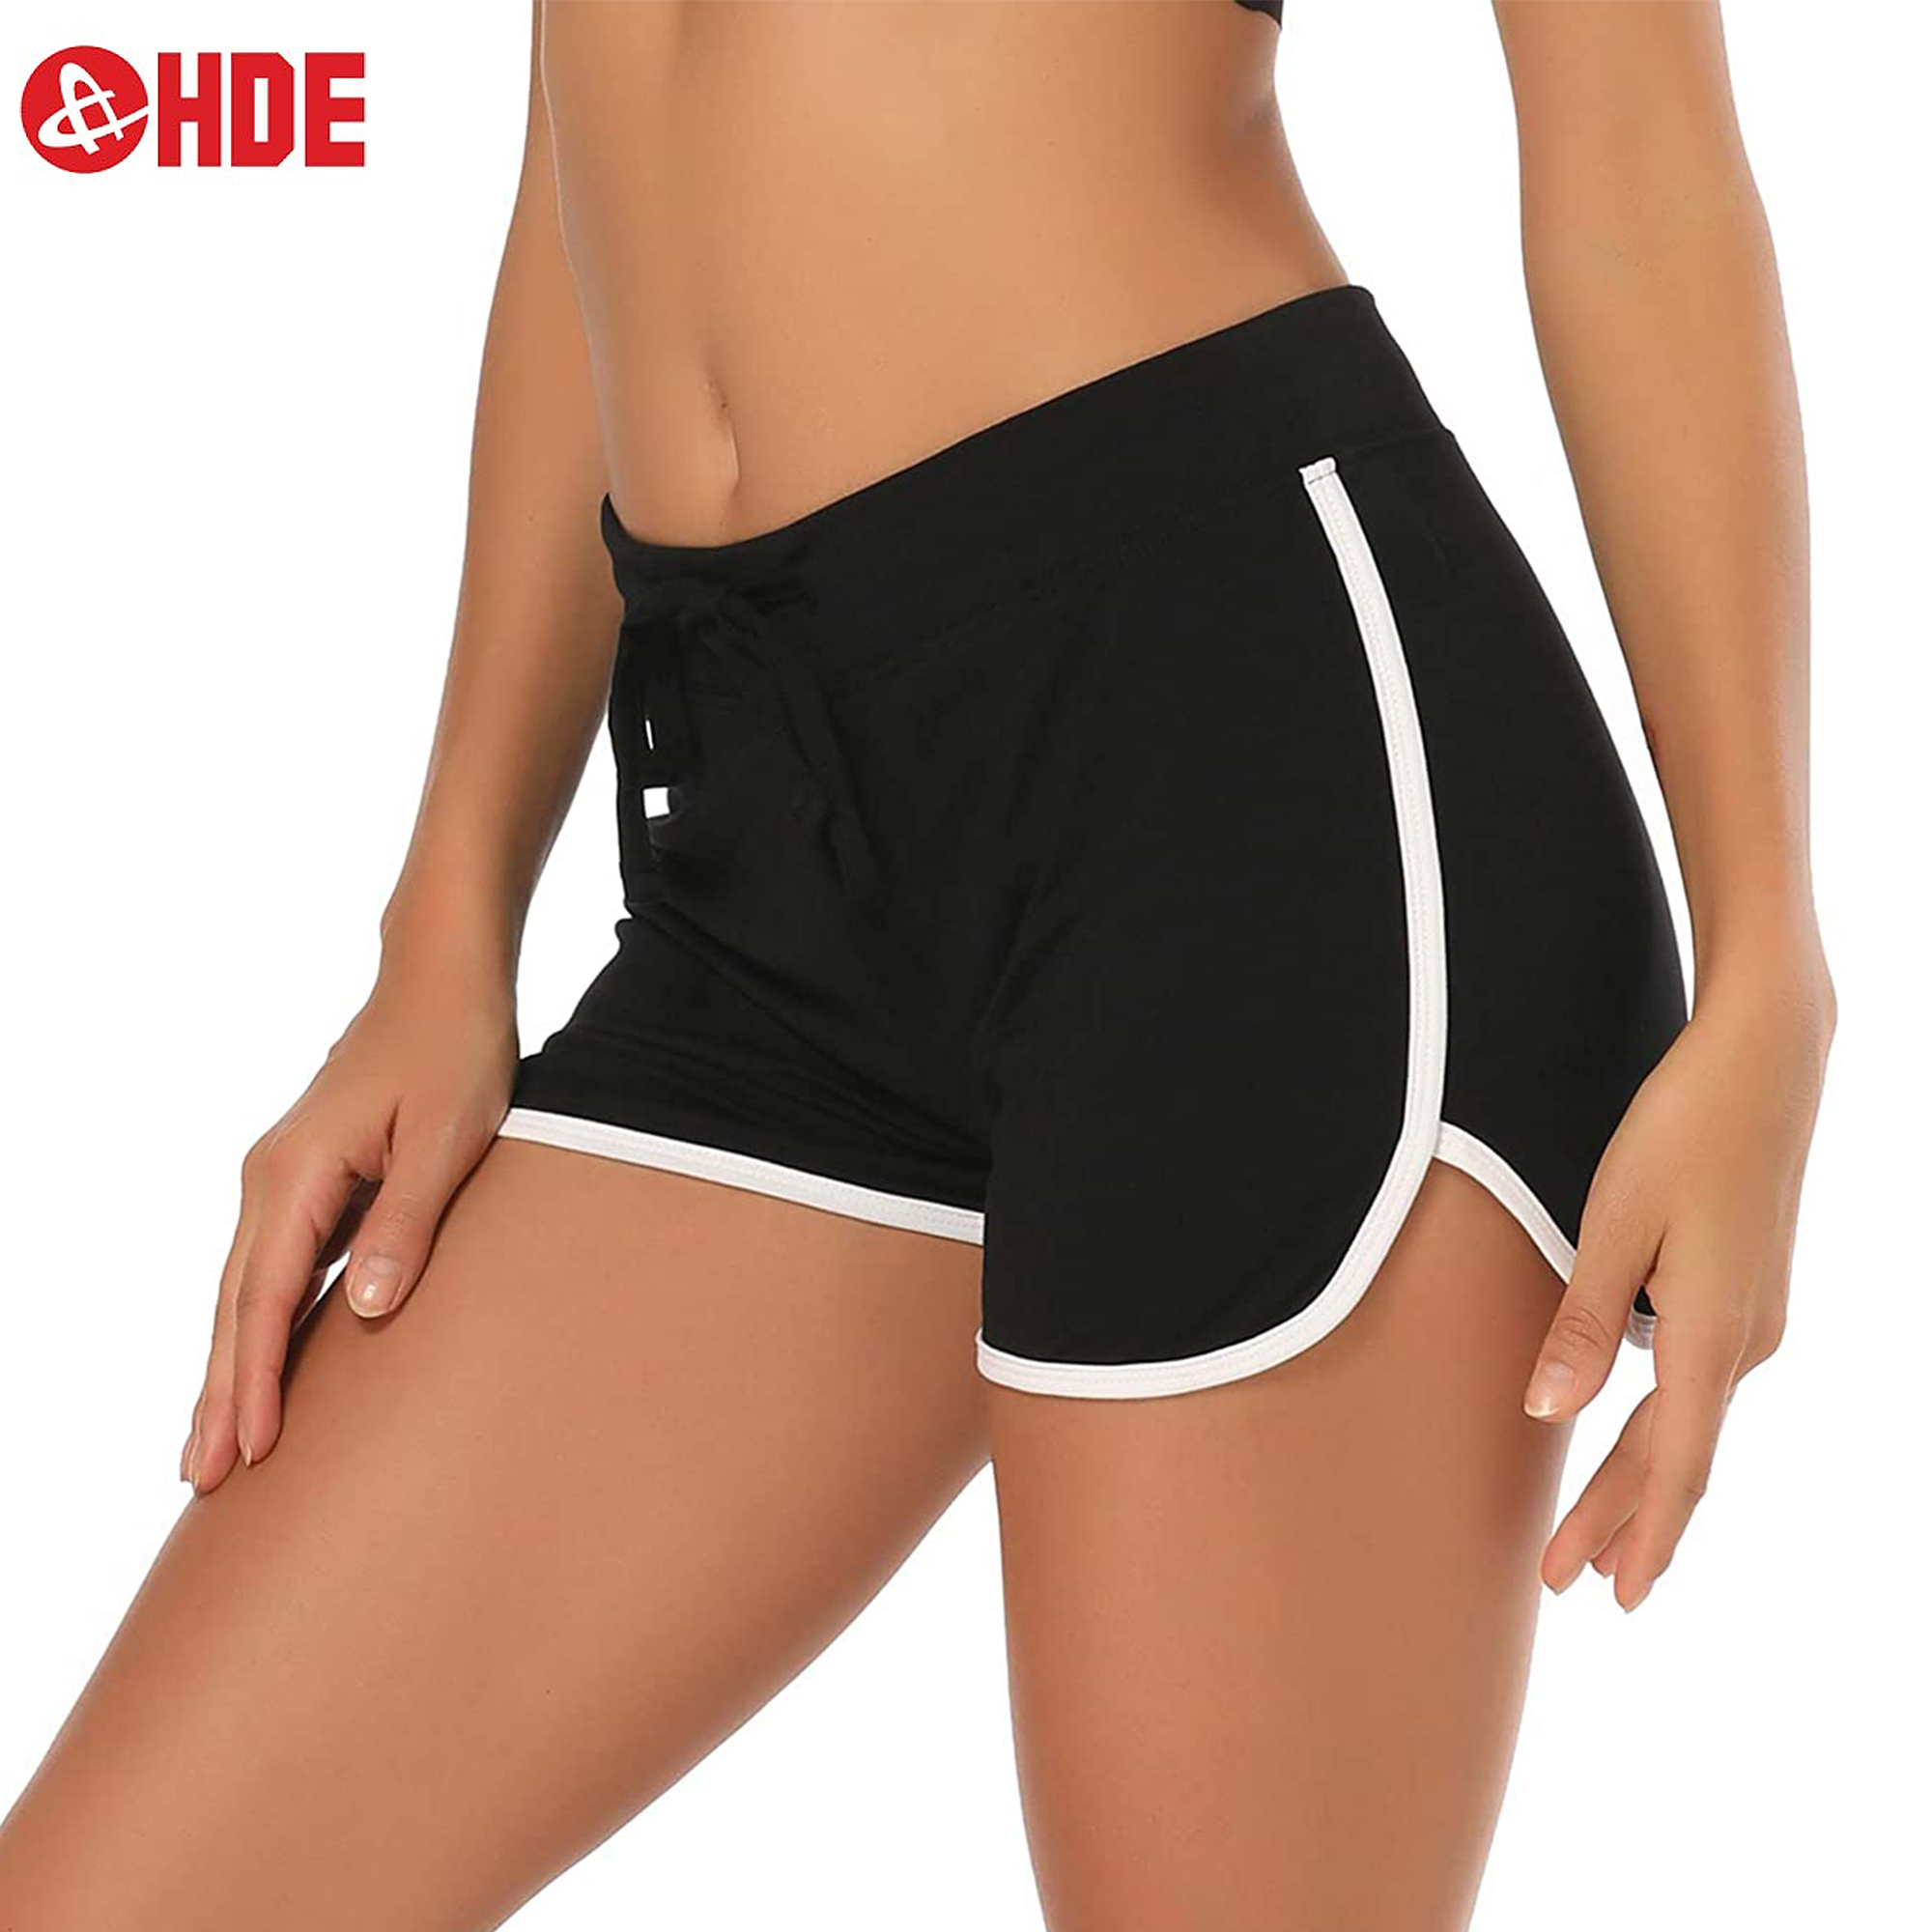 HDE Women Dolphin Shorts Running Workout Clothes Black Small - image 1 of 9